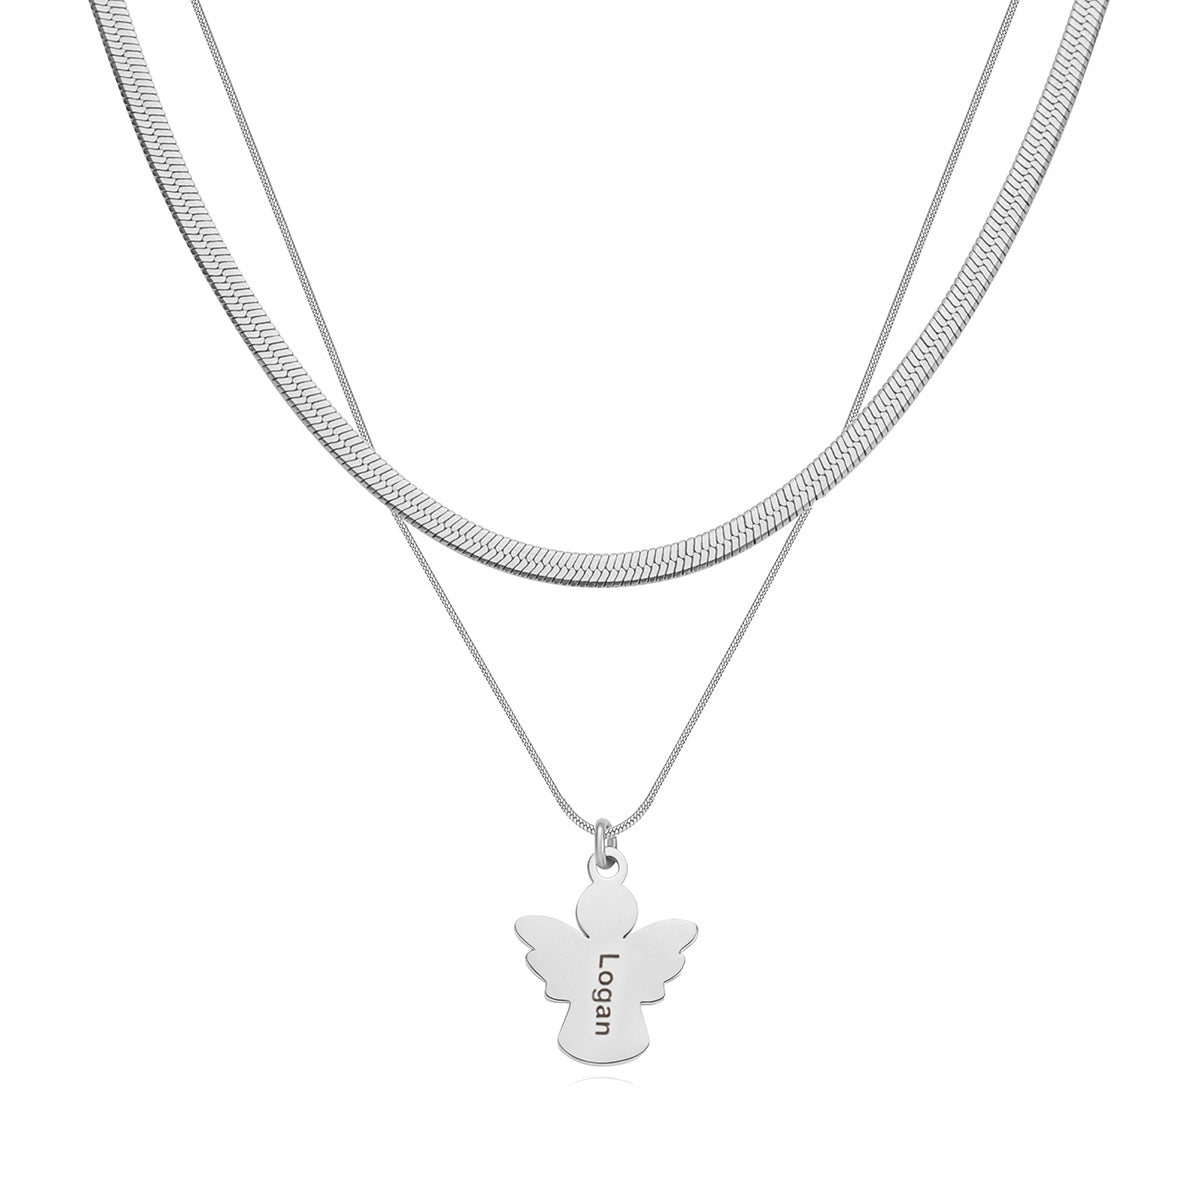 Personalised memorial angel layered necklace